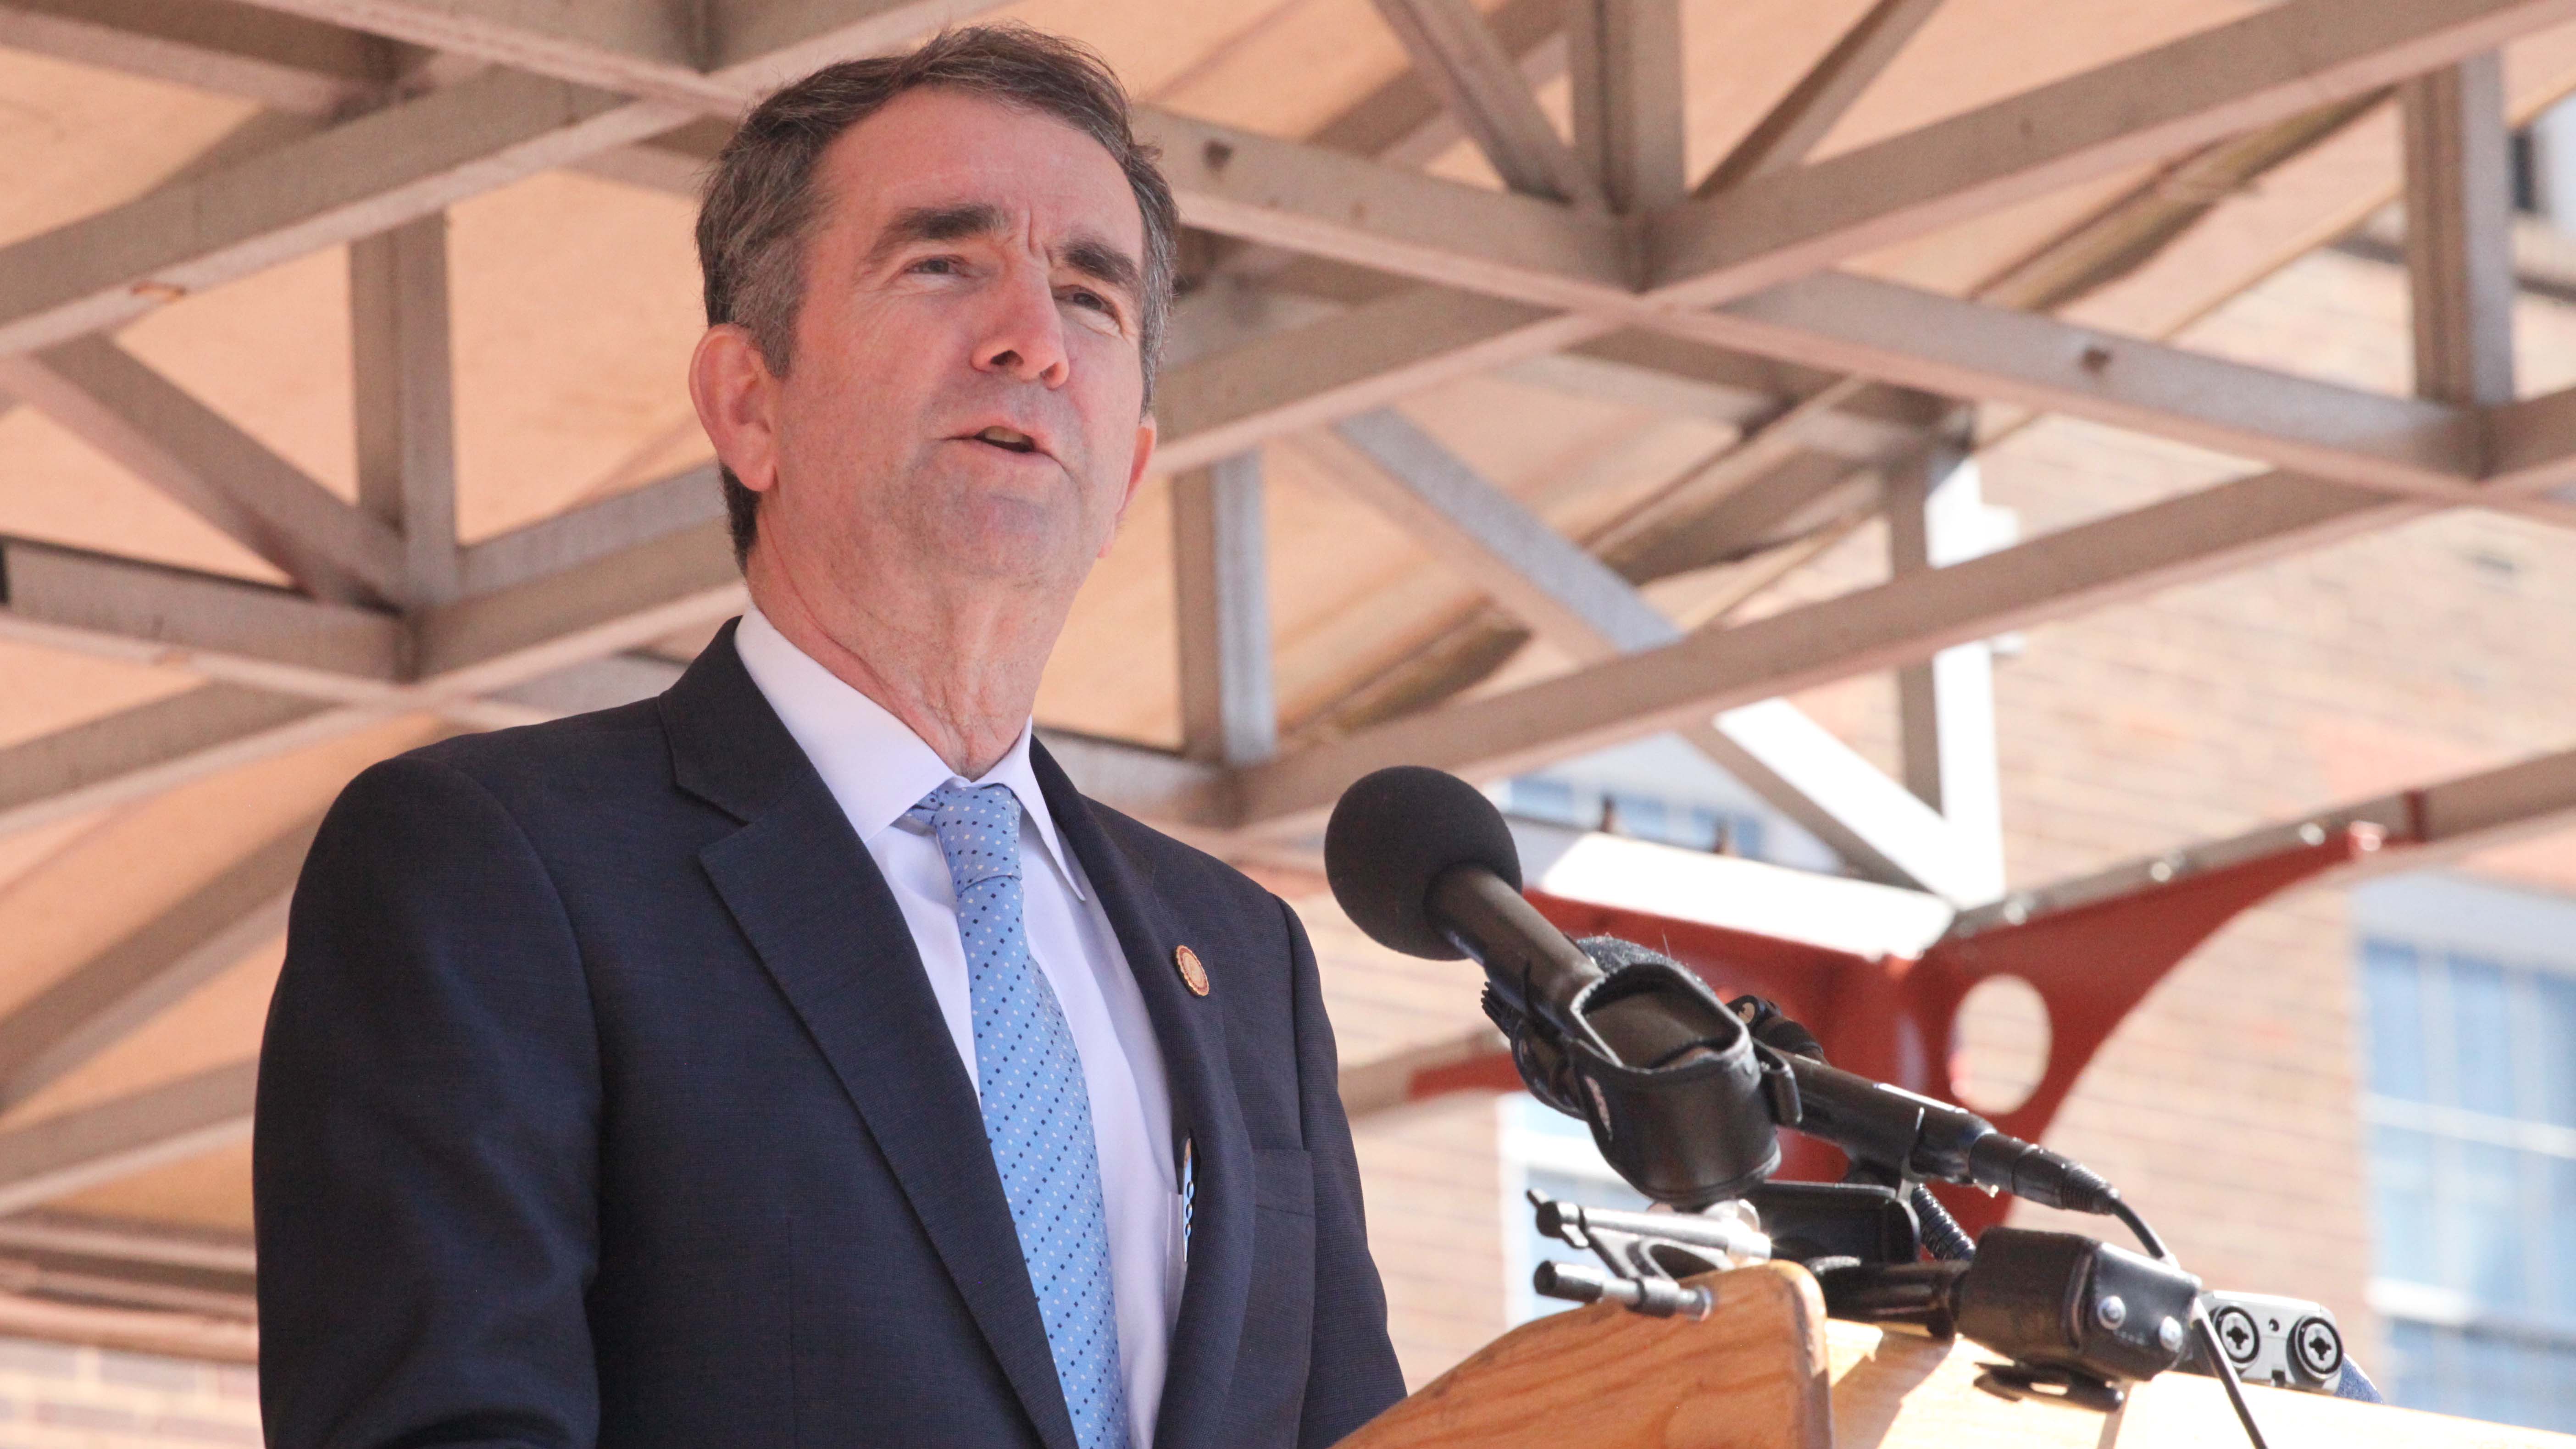 Photo by Eli Wilson via Shutterstock. After a racist photo was found on his yearbook page, former Gov. Ralph Northam went on to implement several progressive policies with support from his party.